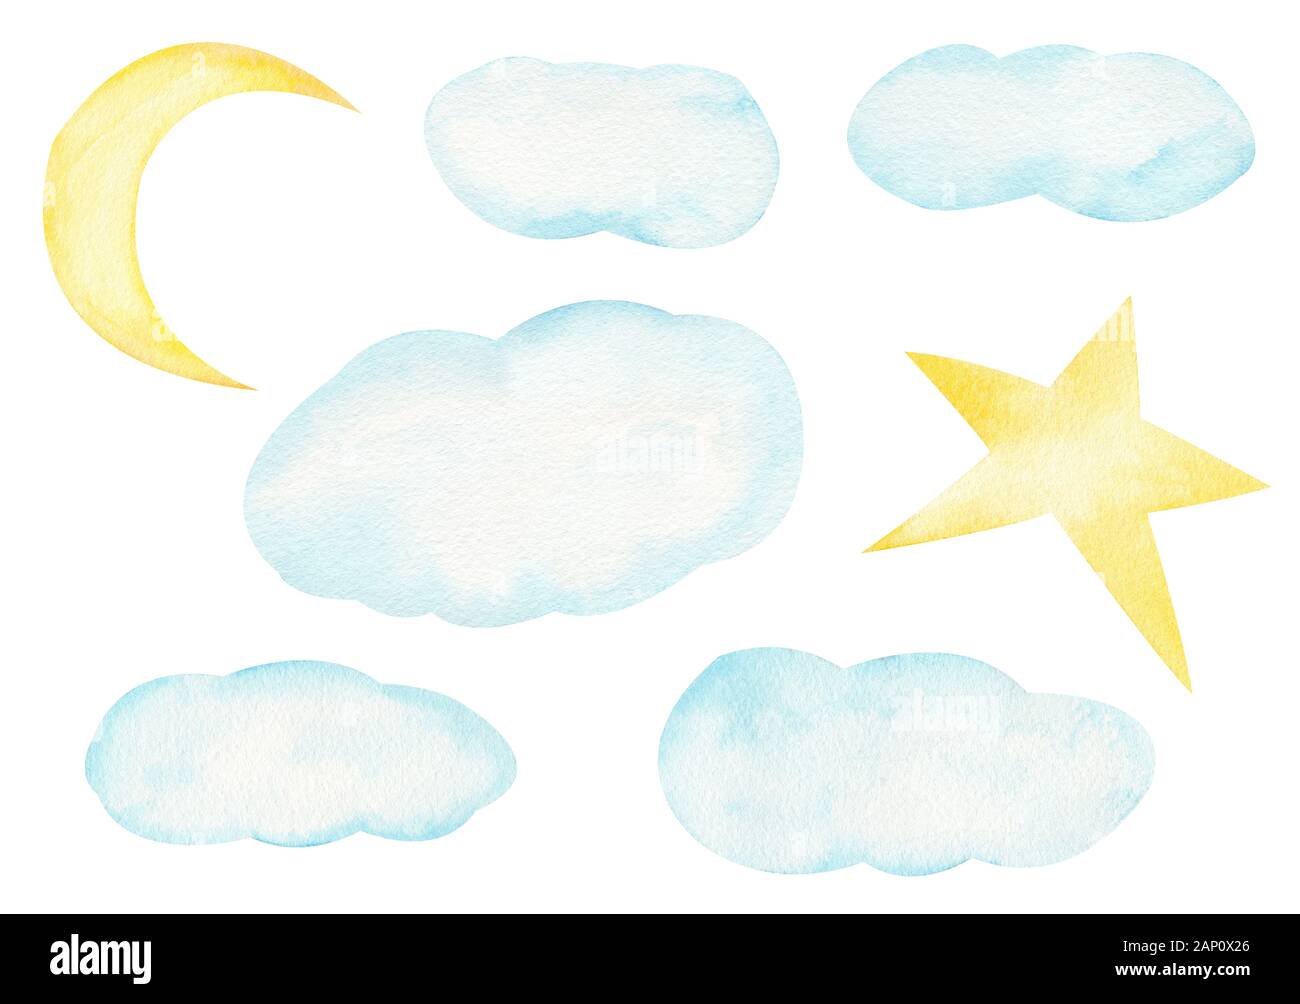 Clouds and heavenly bodies hand drawn raster illustration. Crescent, half moon and star, night sky elements watercolor collection. Aquarelle celestial Stock Photo